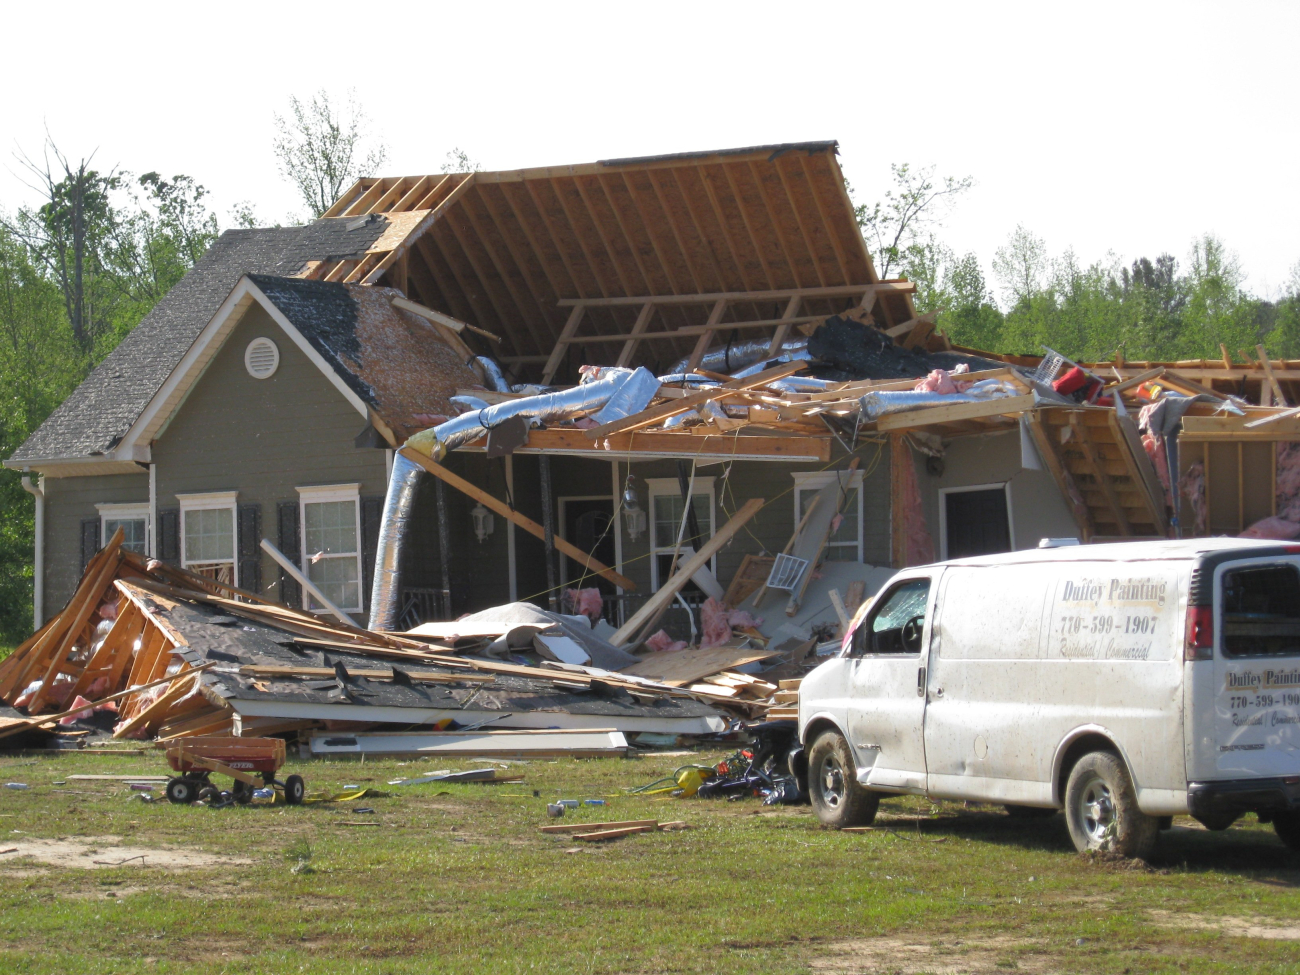 Damage to home in the Weldon Road area of Monroe County by an EF3 maximumstrength tornado that struck Pike, Lamar, Monroe, and Butts Counties